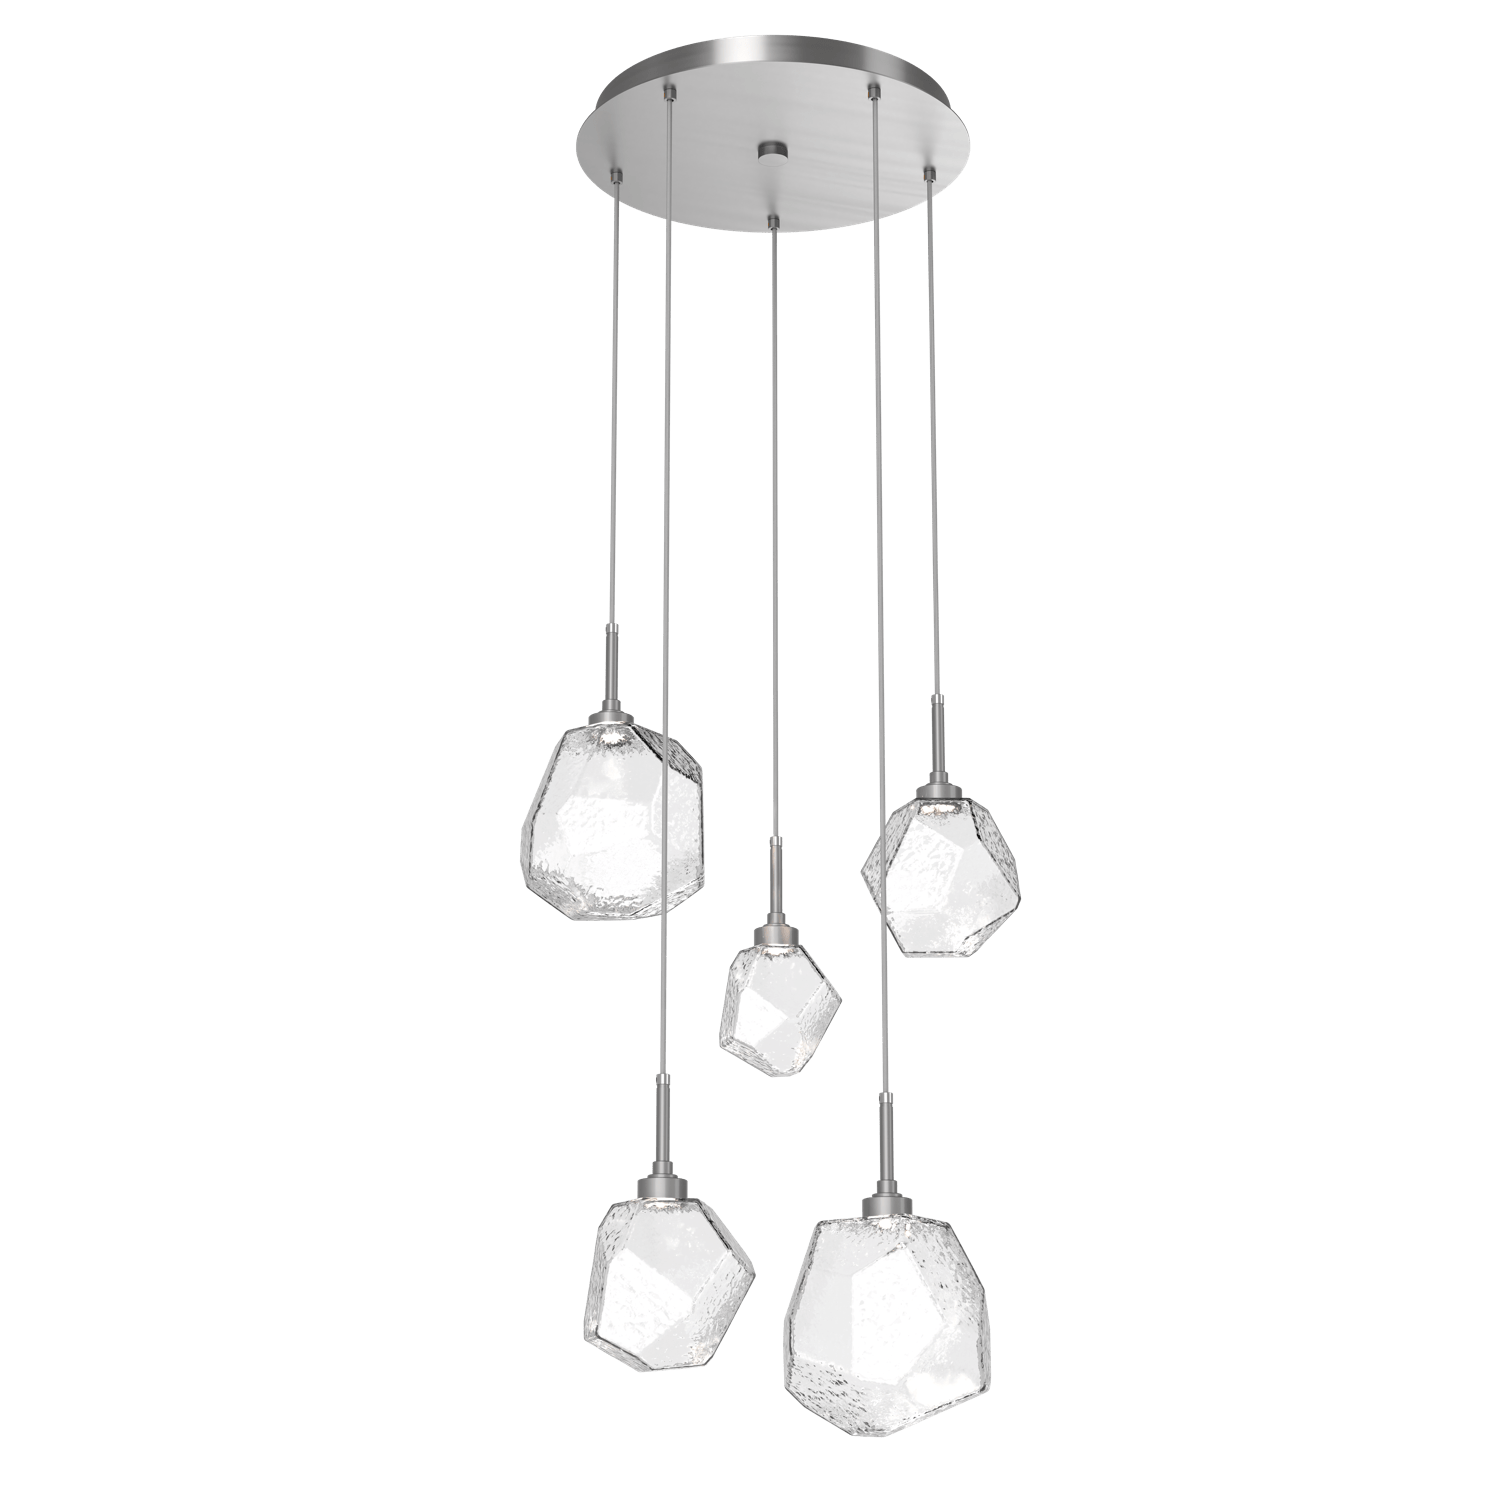 CHB0039-05-SN-C-Hammerton-Studio-Gem-5-light-round-pendant-chandelier-with-satin-nickel-finish-and-clear-blown-glass-shades-and-LED-lamping